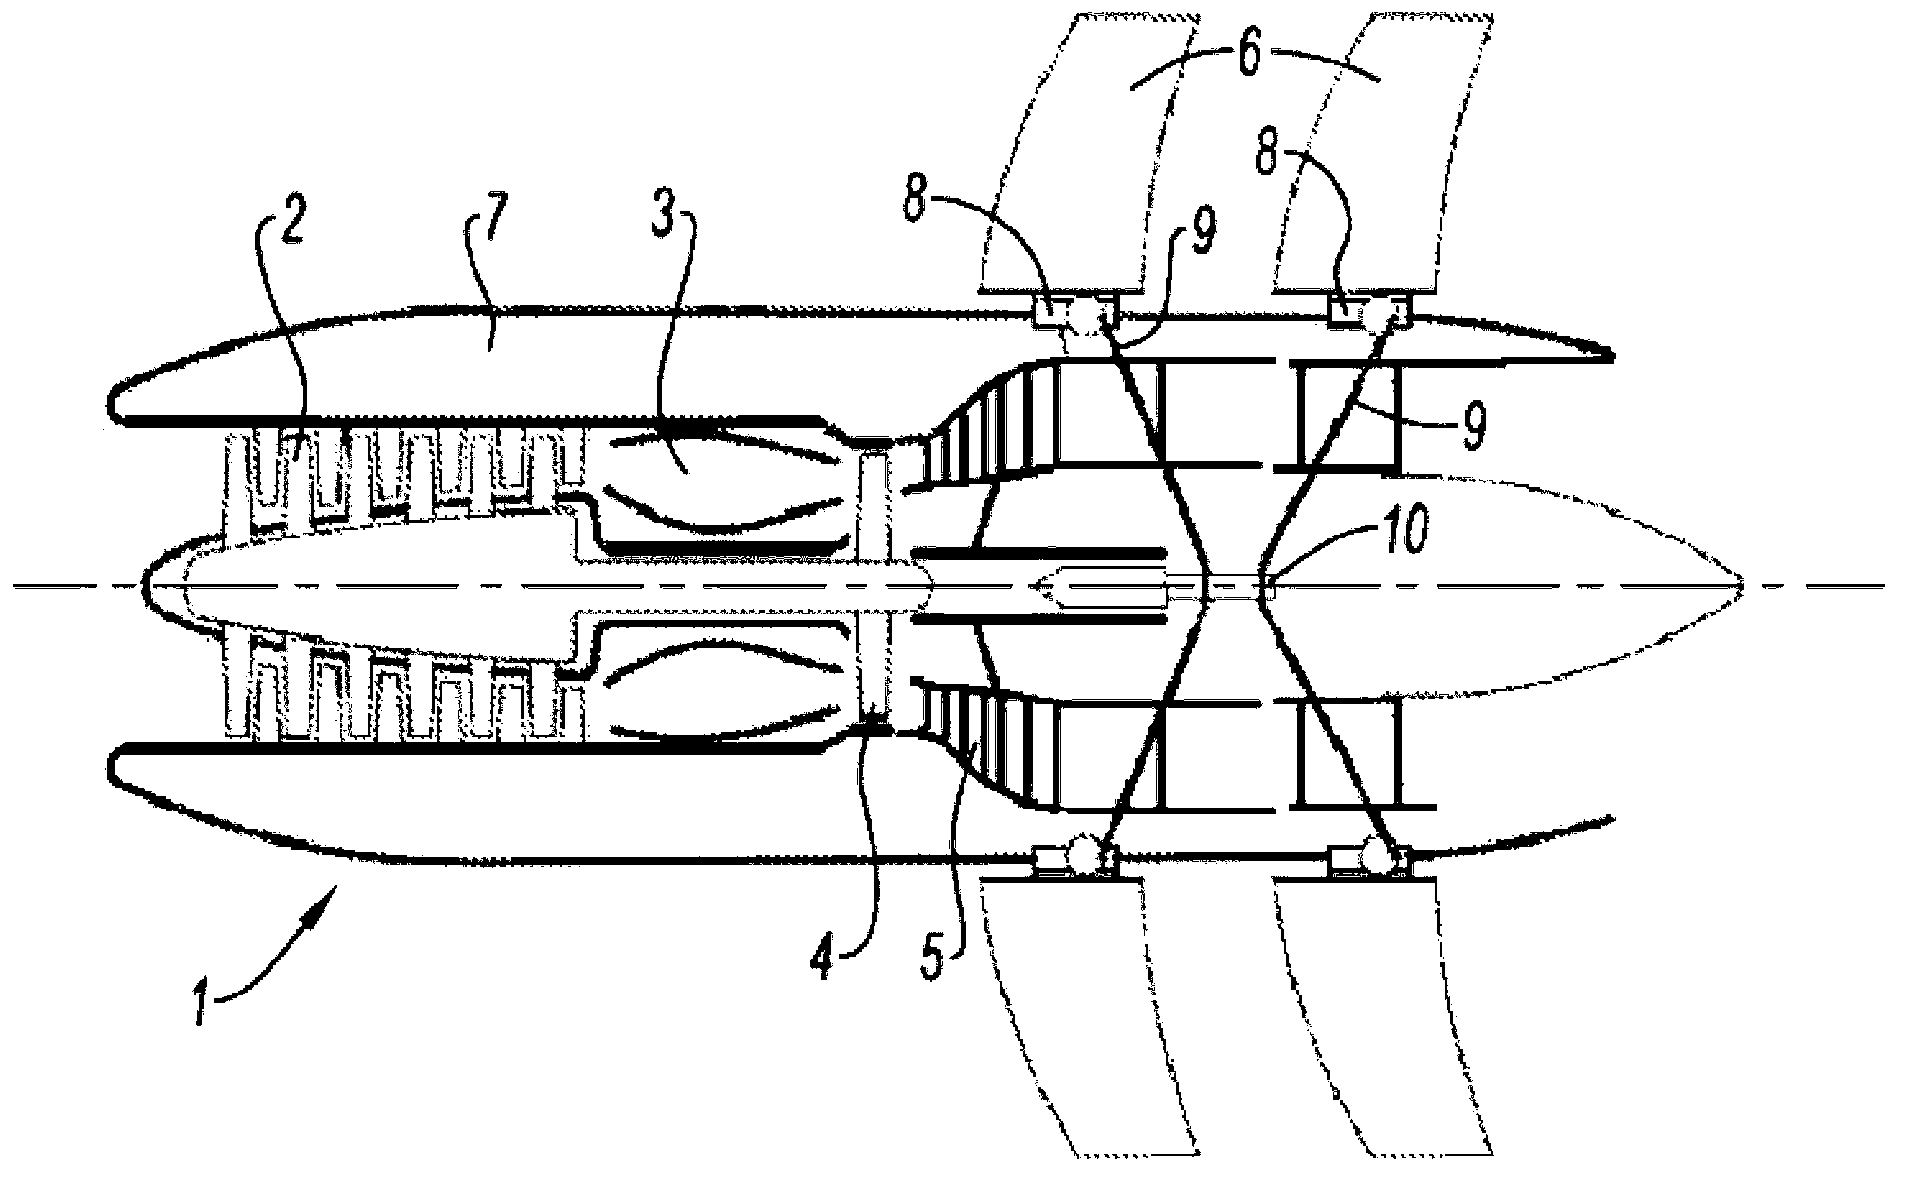 Device for shifting a propeller into reverse, comprising an actuator acting on a crank pin